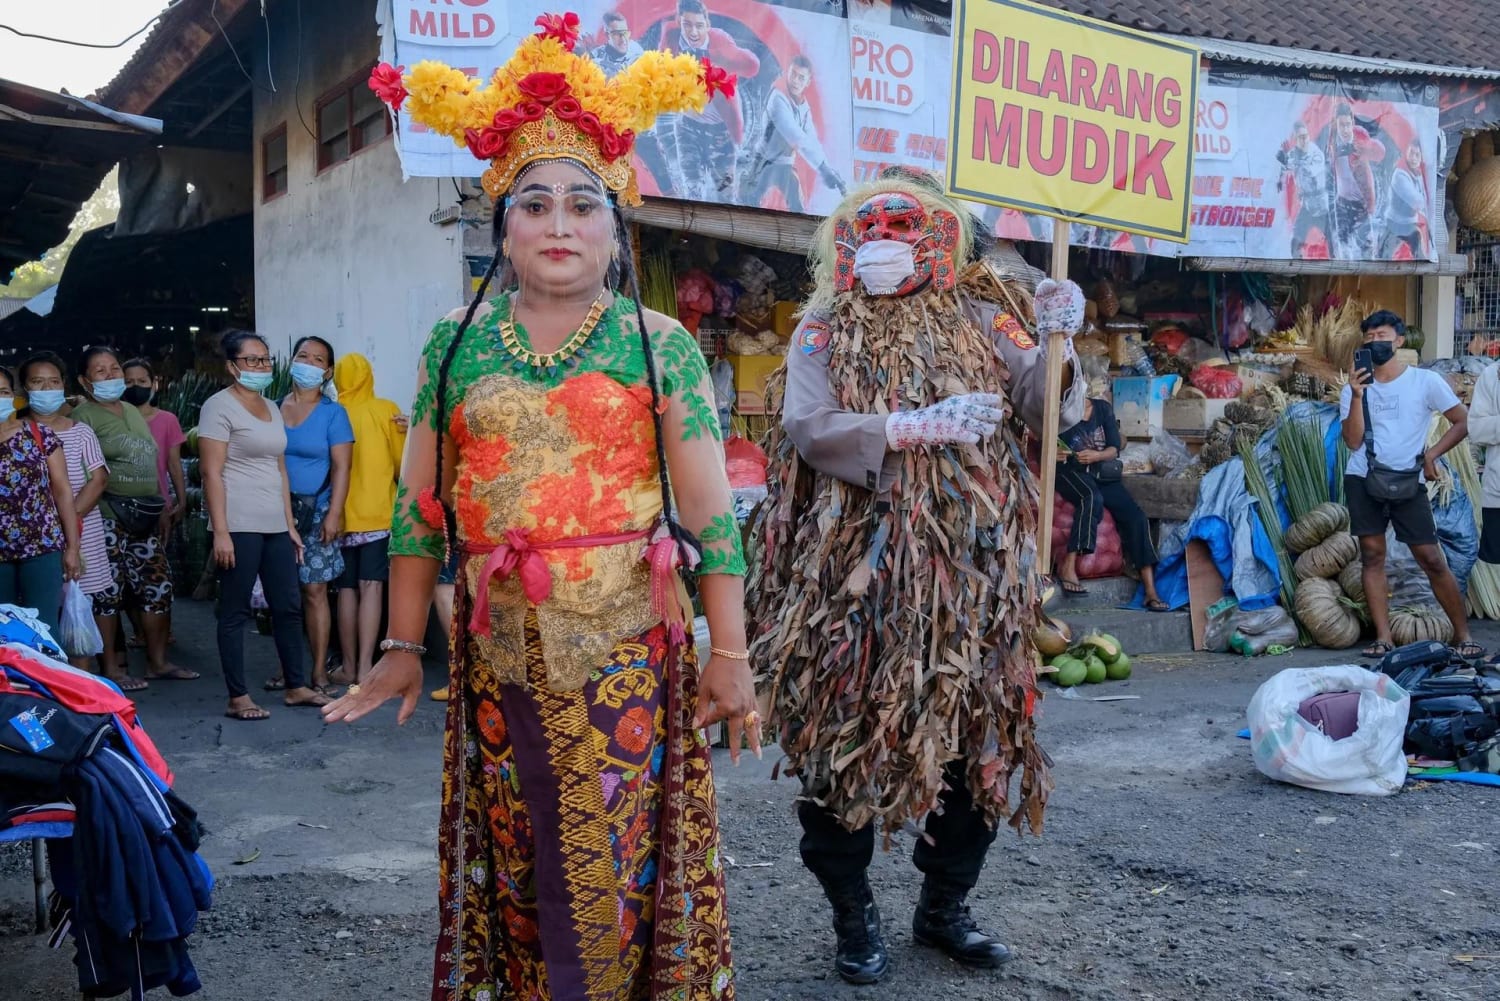 A police officer and a traditional dancer educate people on how to prevent the spread of Covid-19 in Bali, Indonesia. Photograph: Made Nagi/EPA